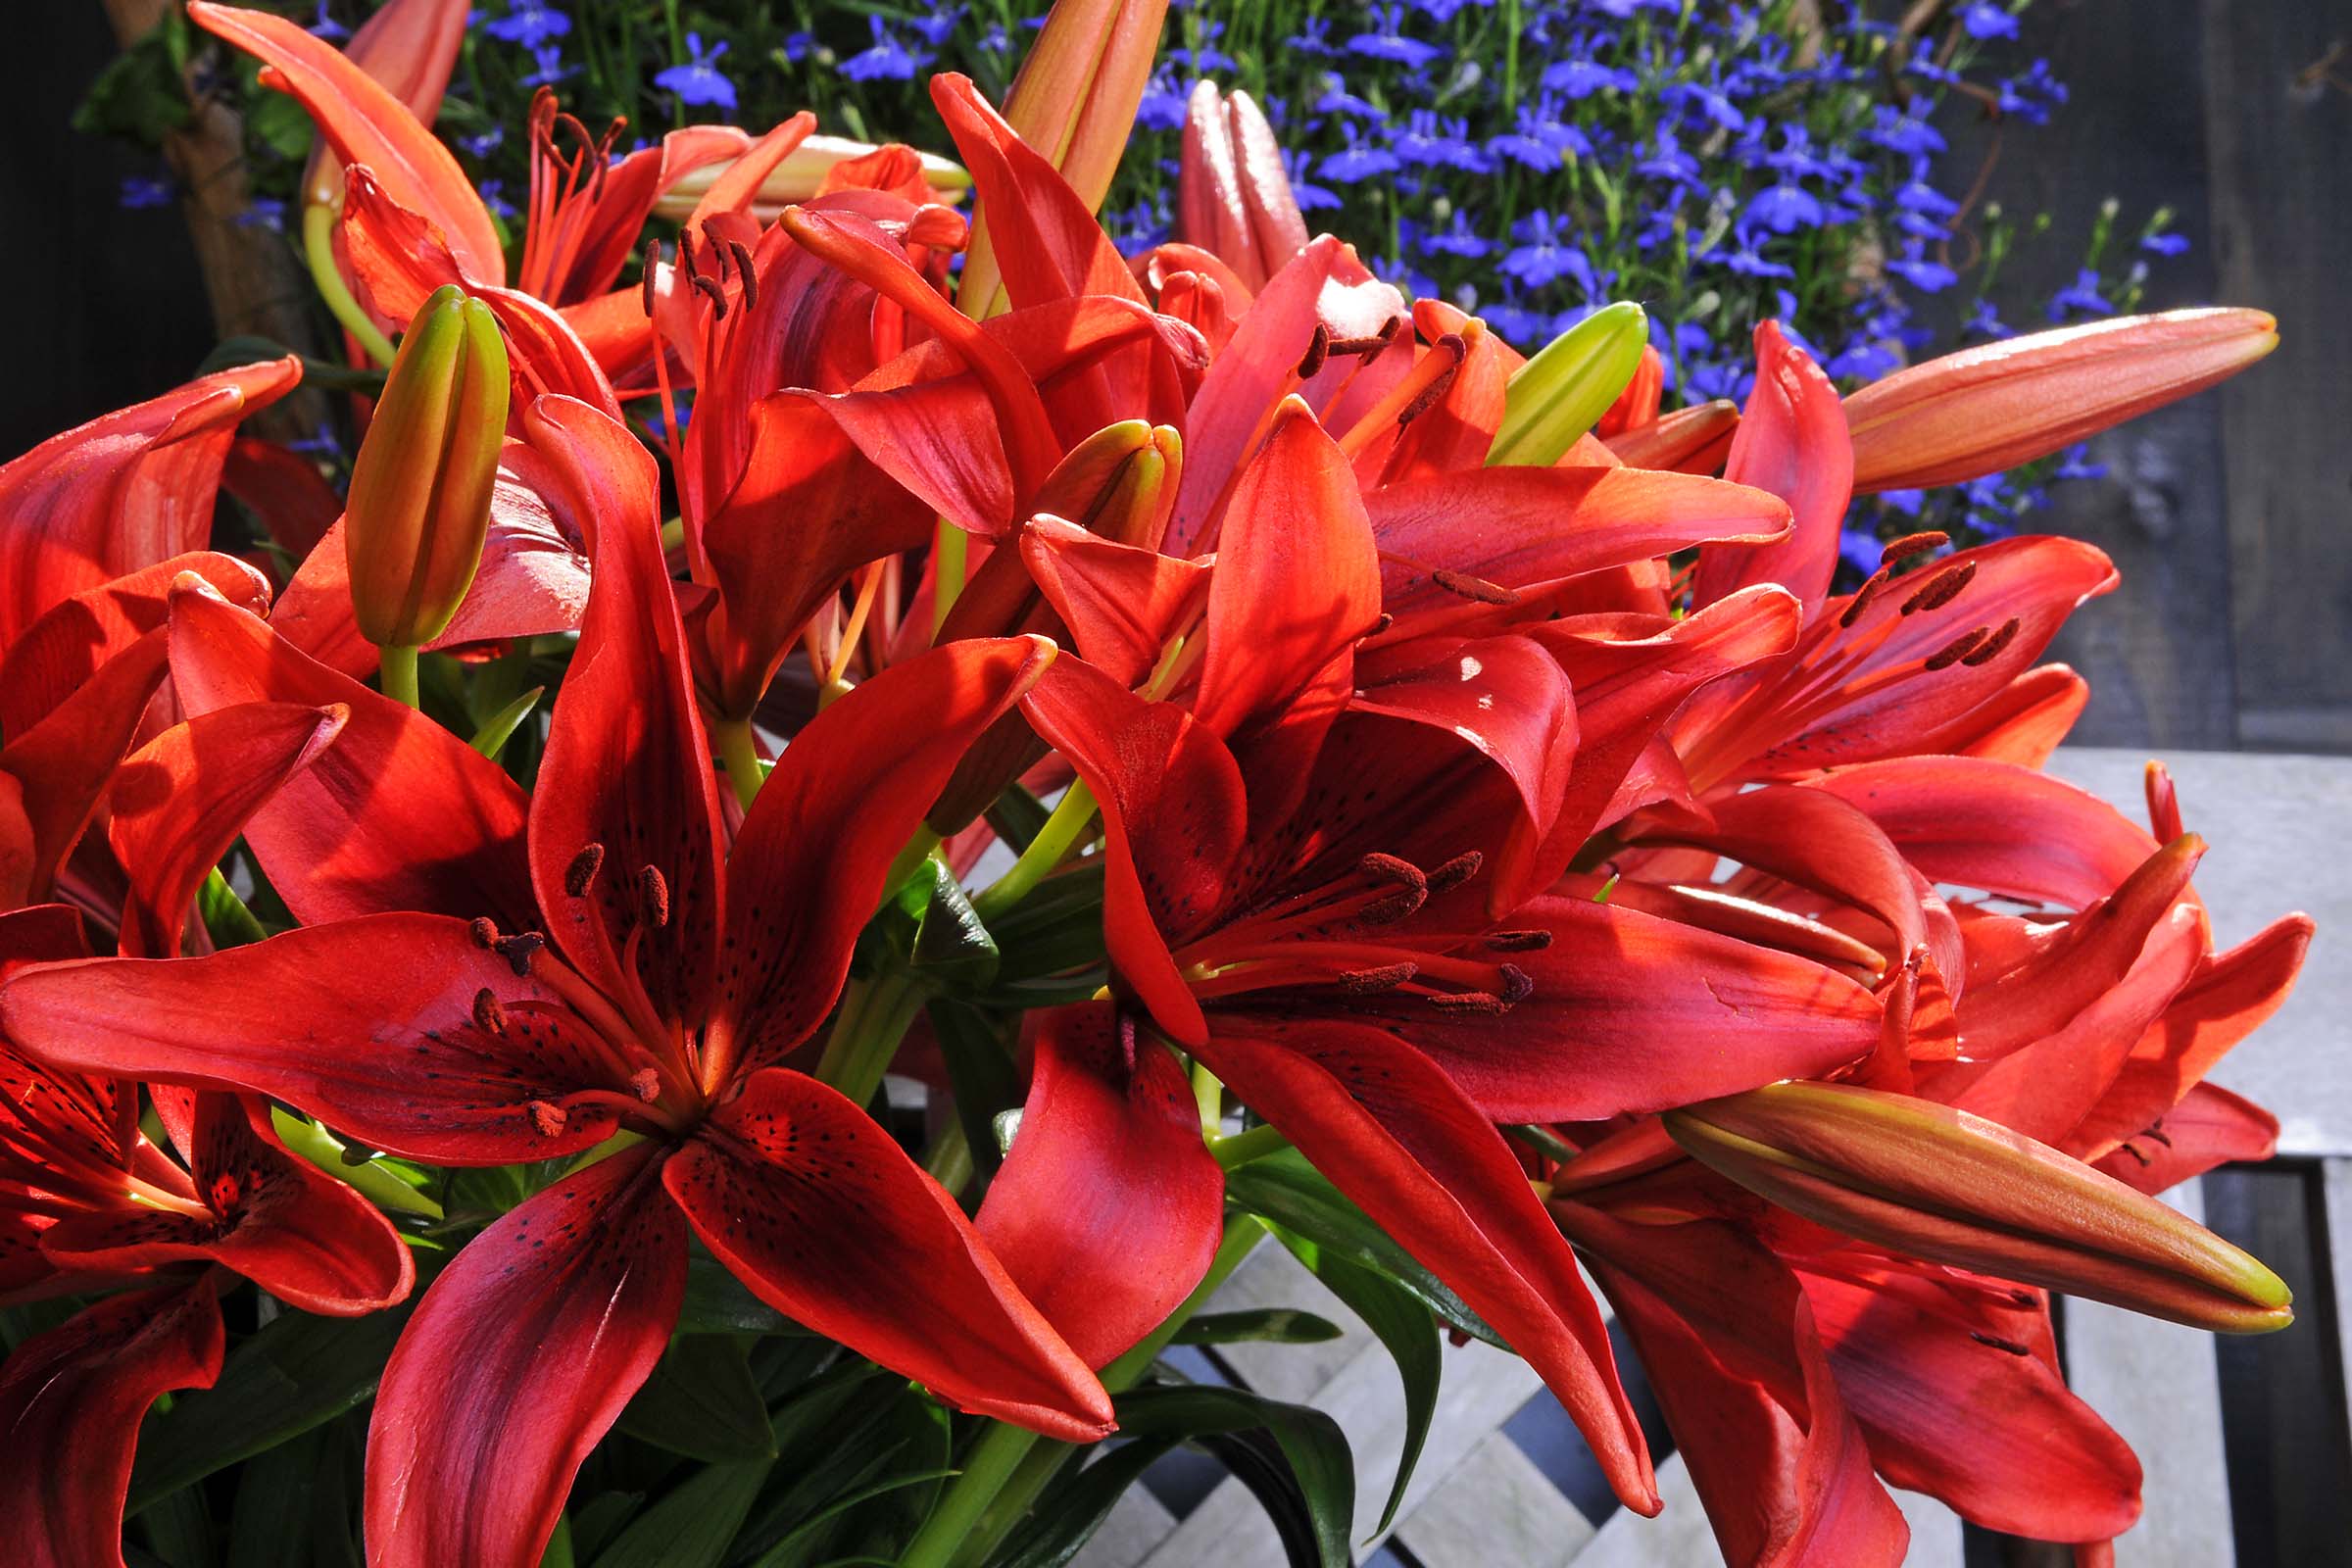 lilies-for-autumn-holidays-are-always-a-great-idea-featured